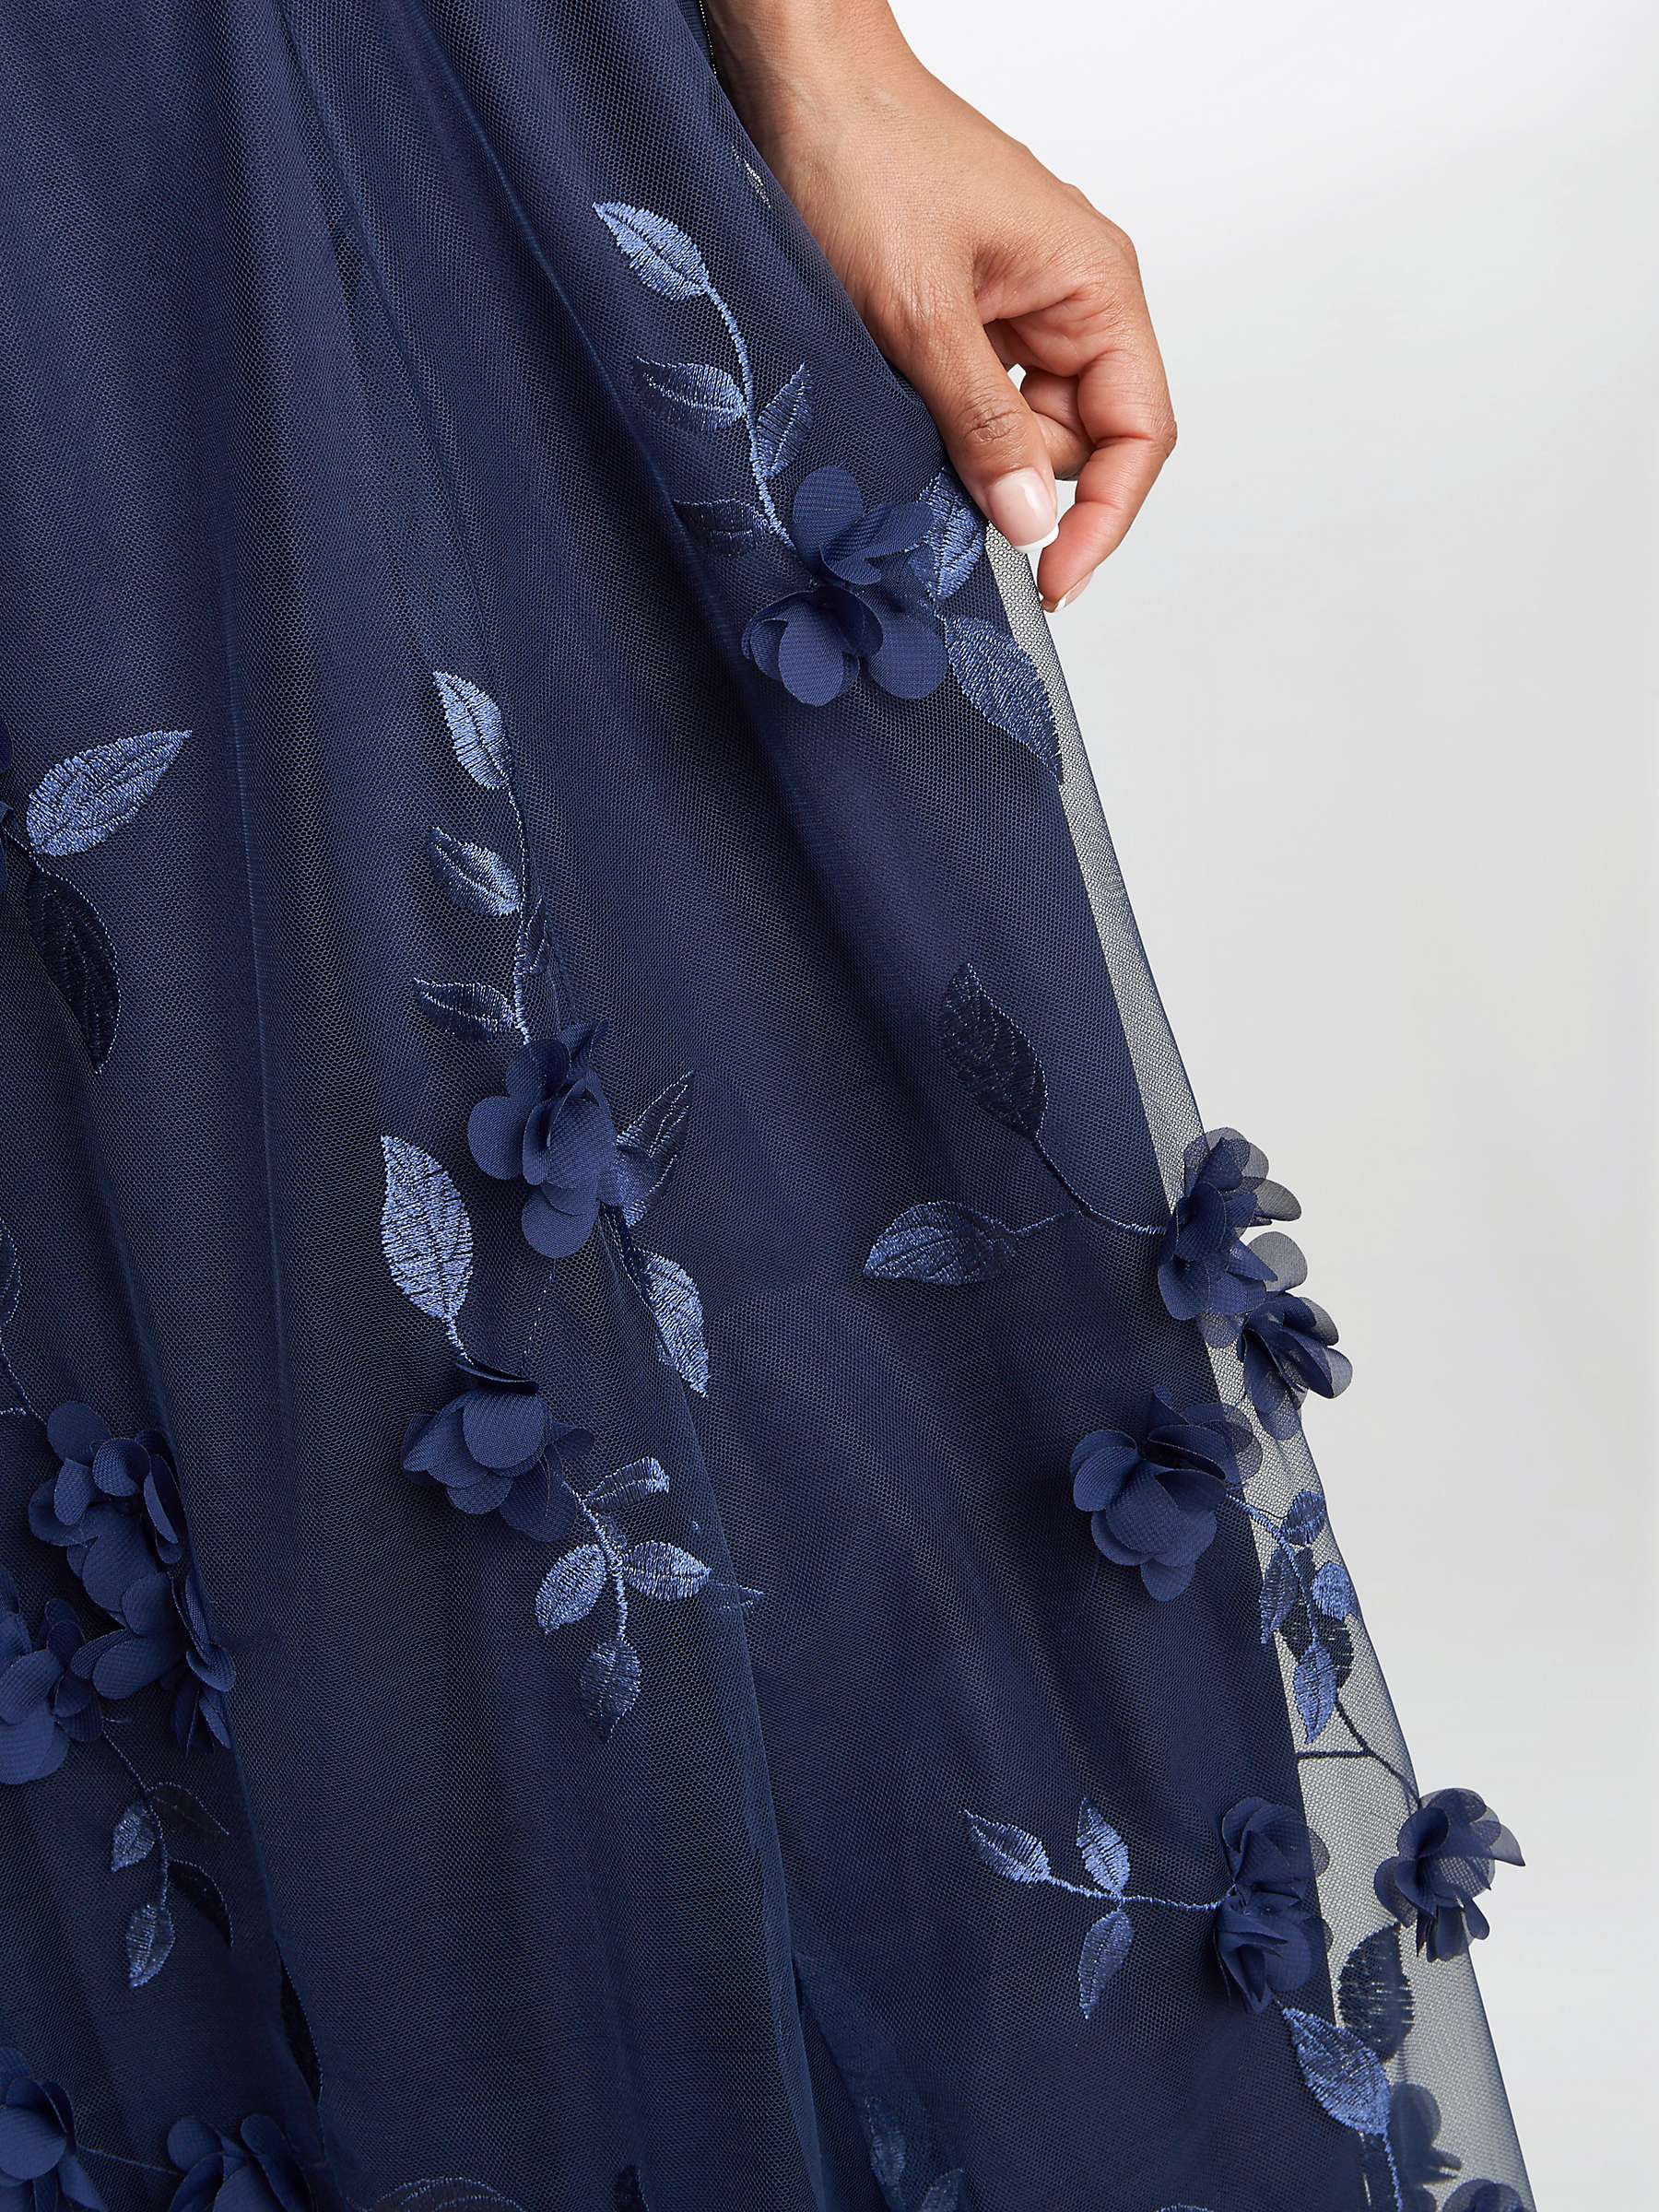 Buy Gina Bacconi Olyssia Leaf Embroidery Maxi Dress, Navy Online at johnlewis.com